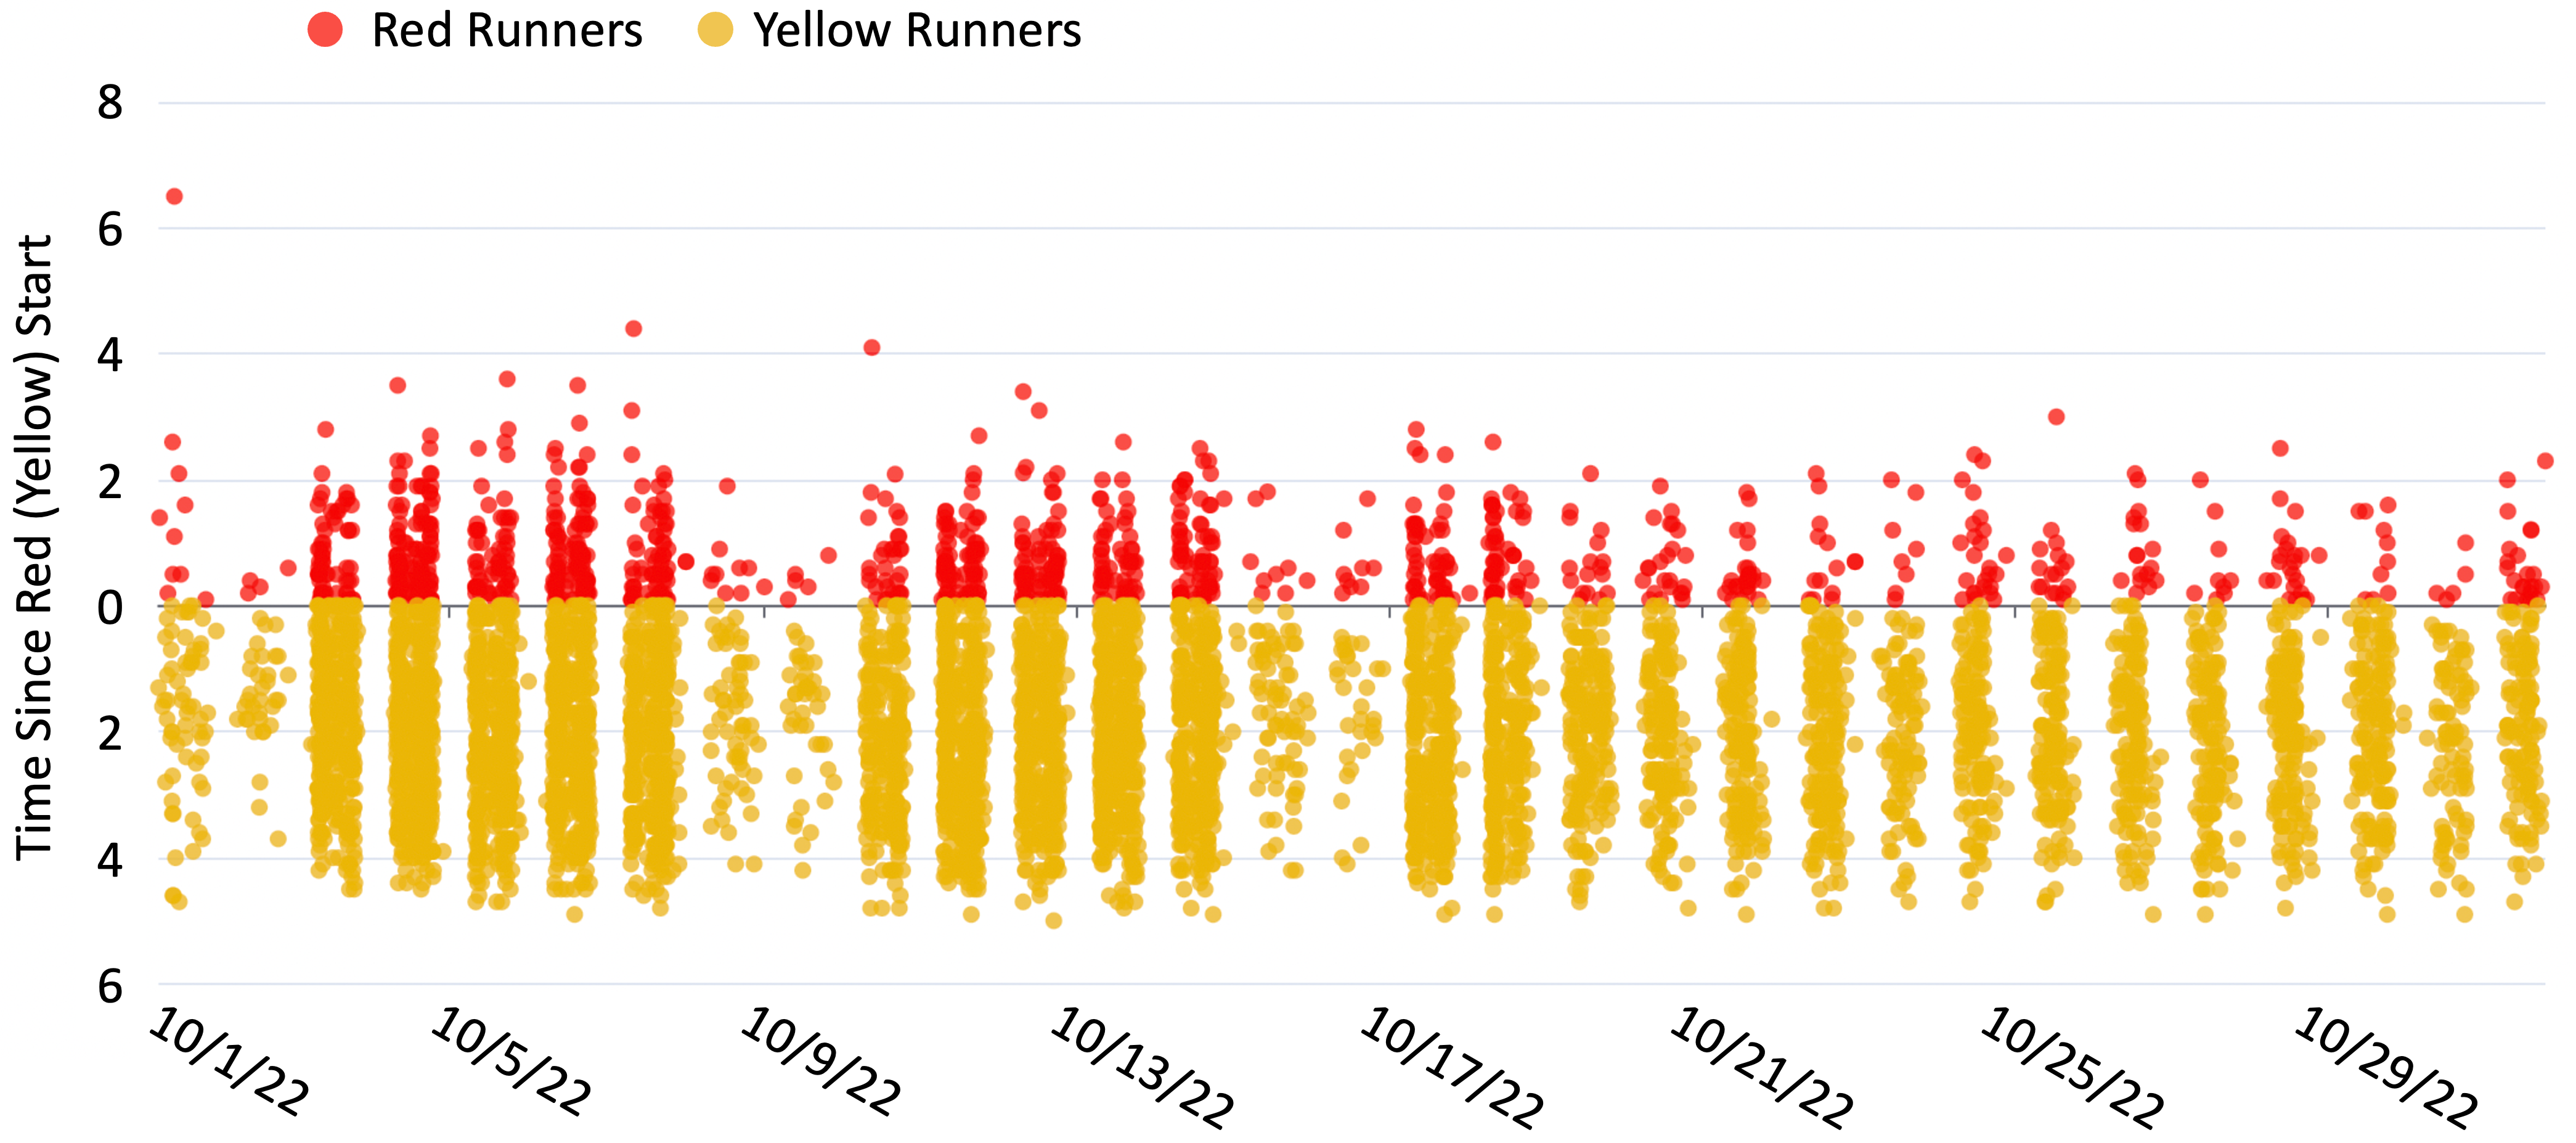 image of Red and Yellow Light Runners sample data